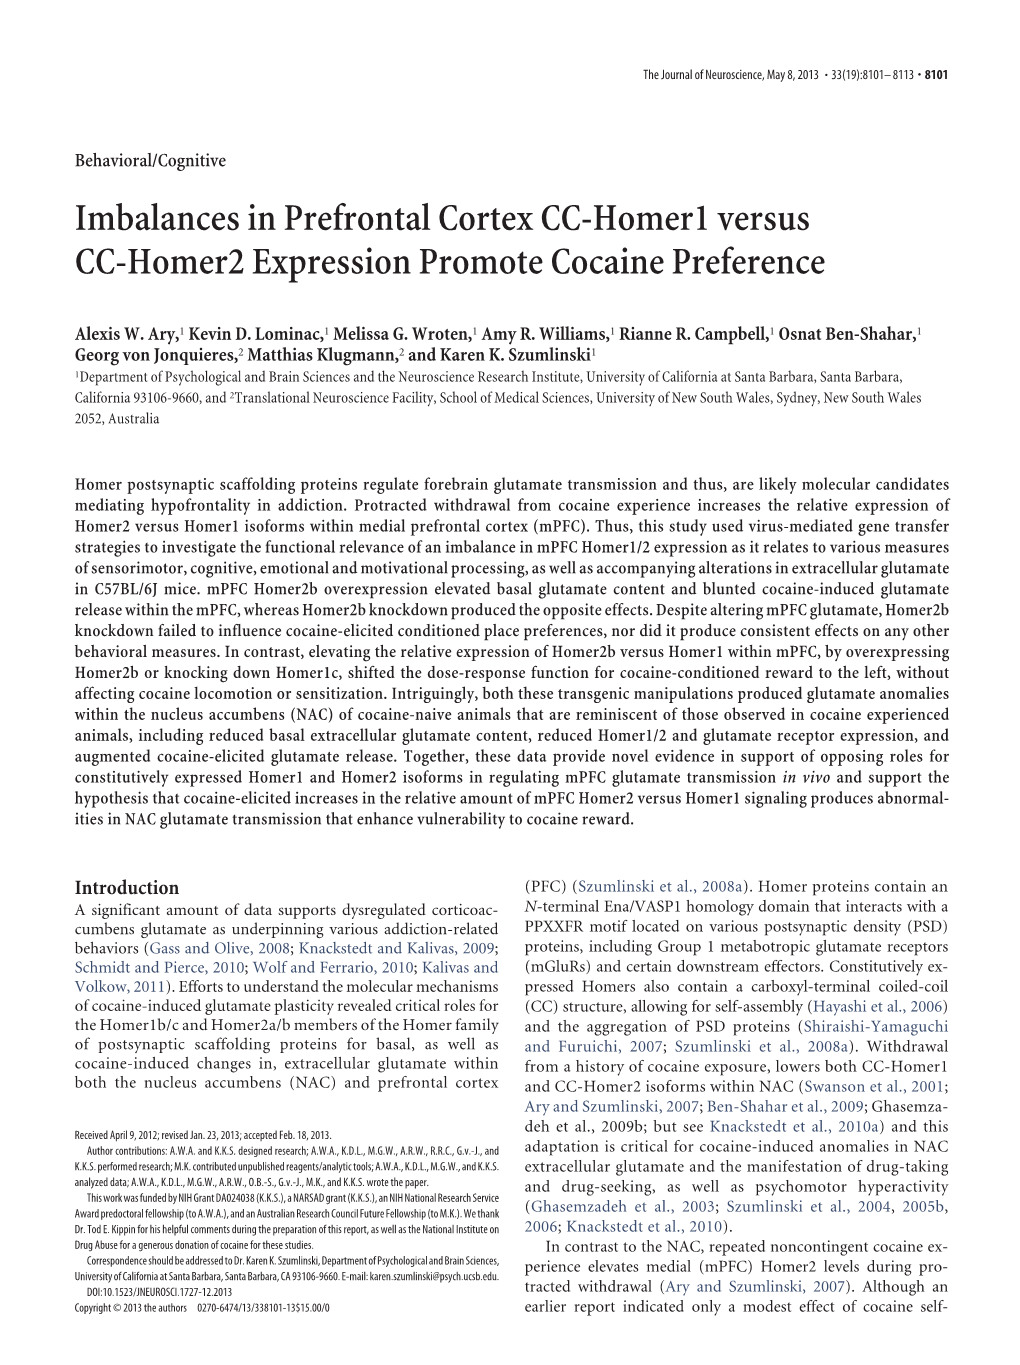 Imbalances in Prefrontal Cortex CC-Homer1 Versus CC-Homer2 Expression Promote Cocaine Preference